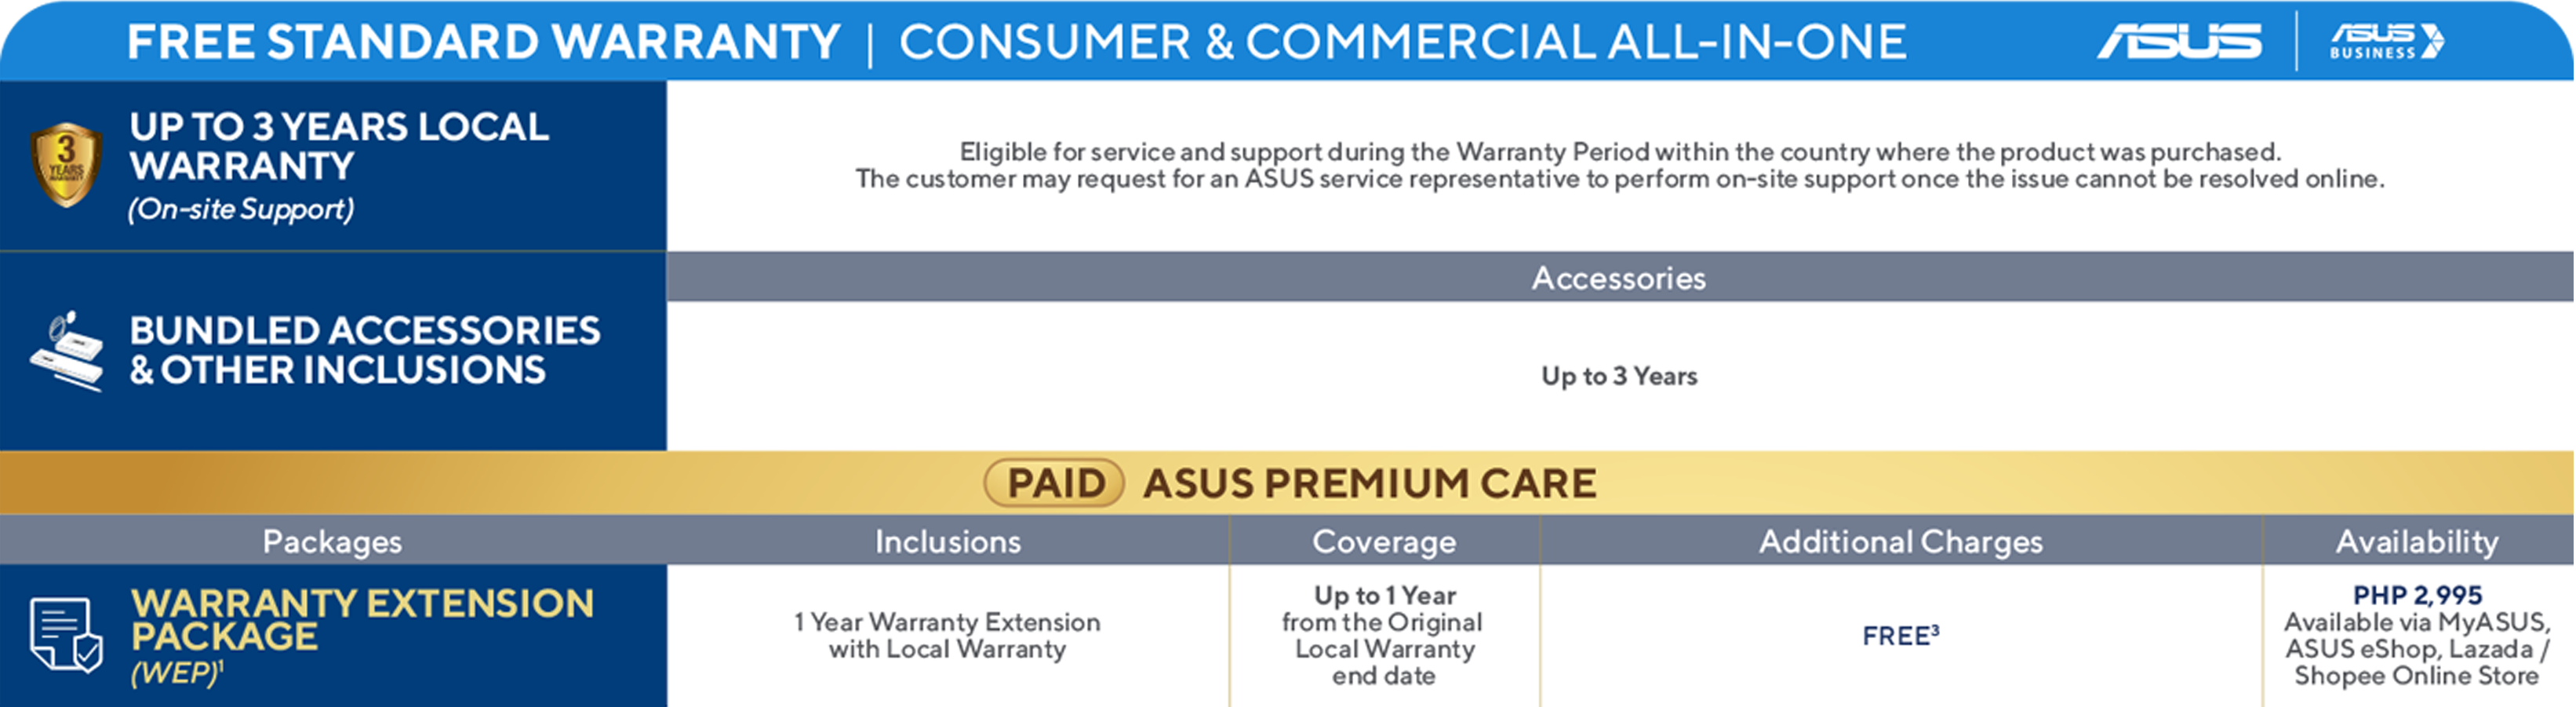 Free Standard Warranty | Consumer & Commercial All-In-One